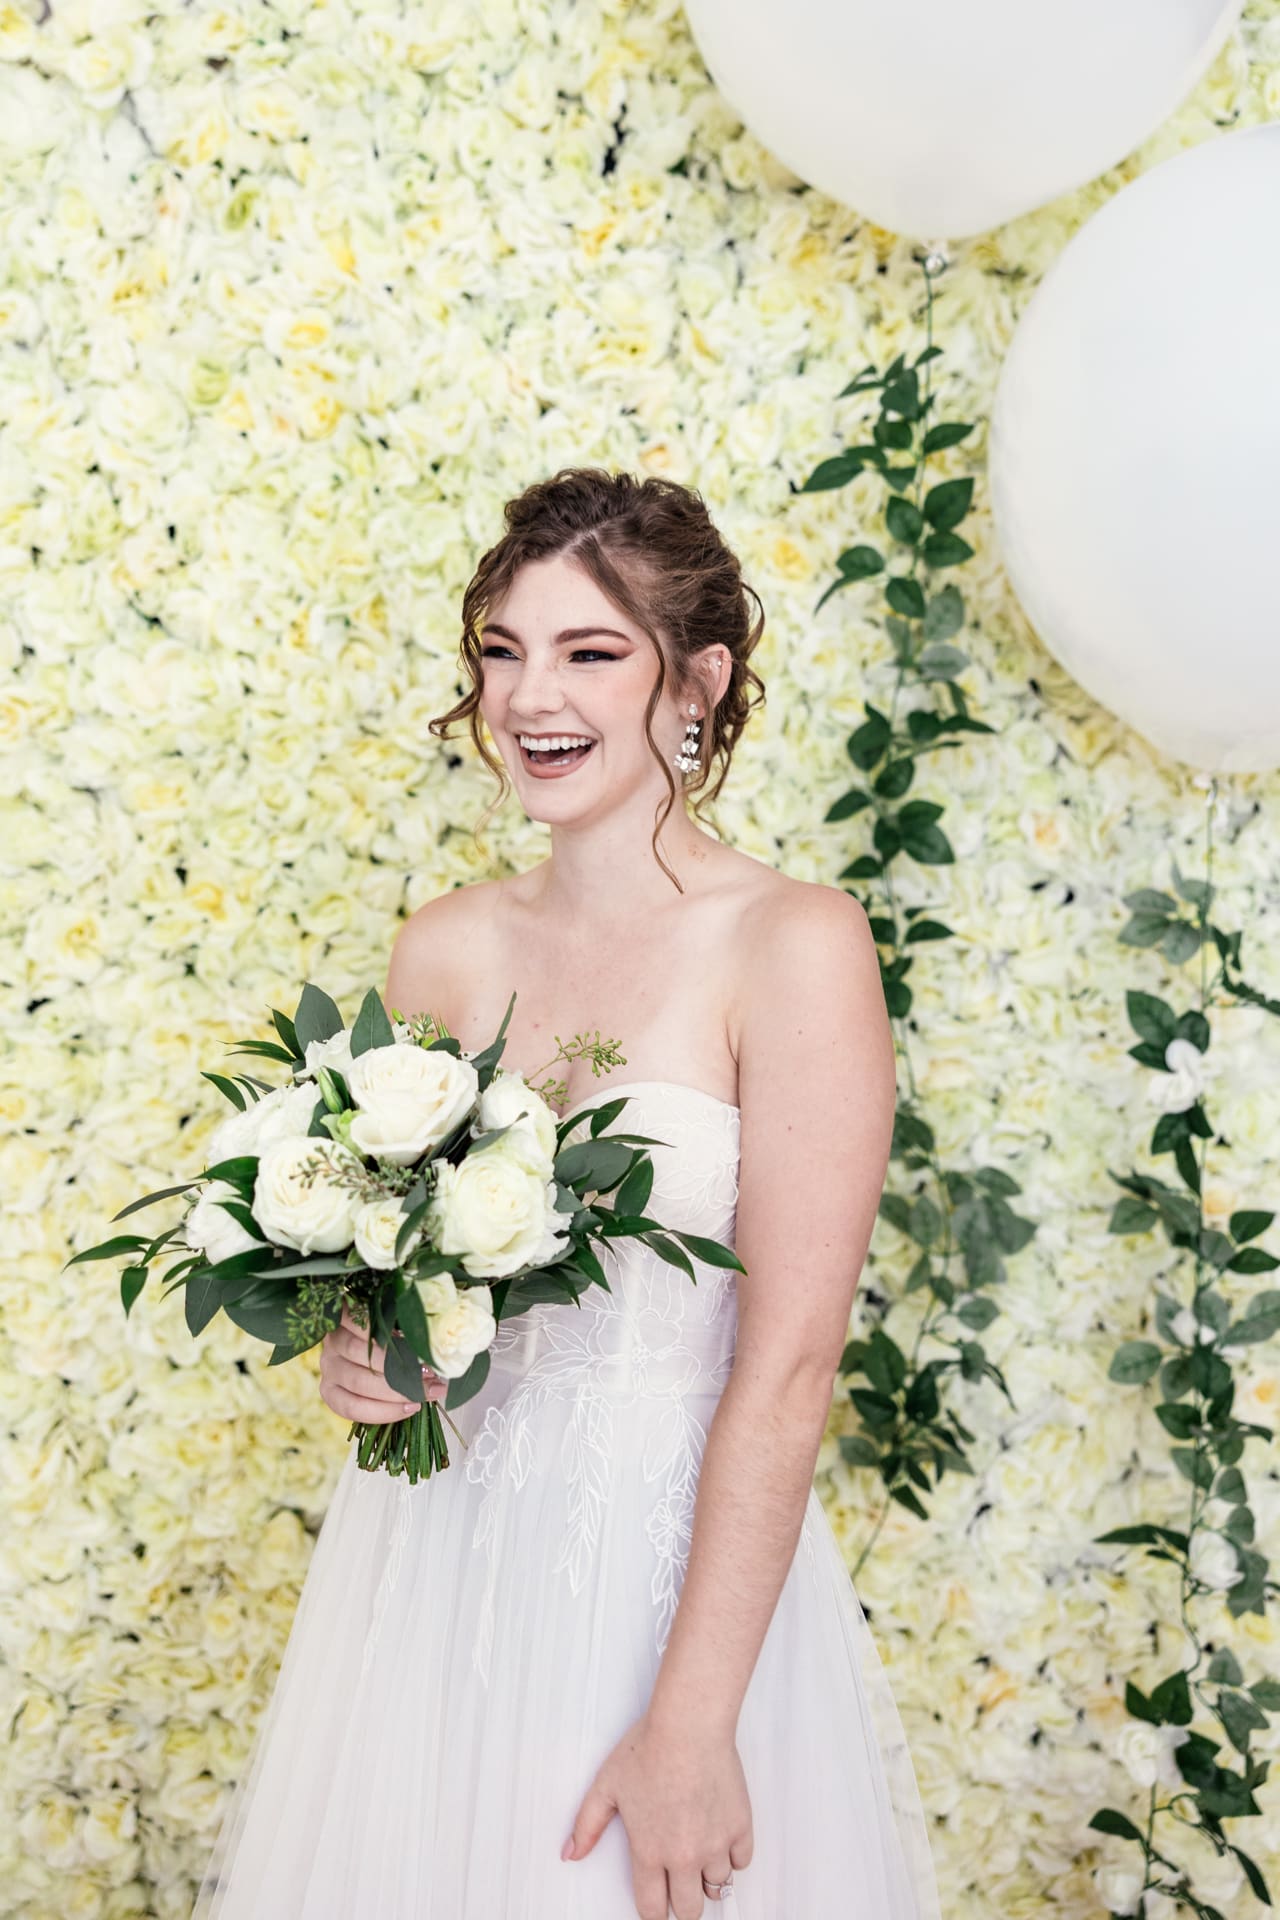 Candid photo of bride laughing in front of white floral backdrop at Chicago photography studio P&M Studio